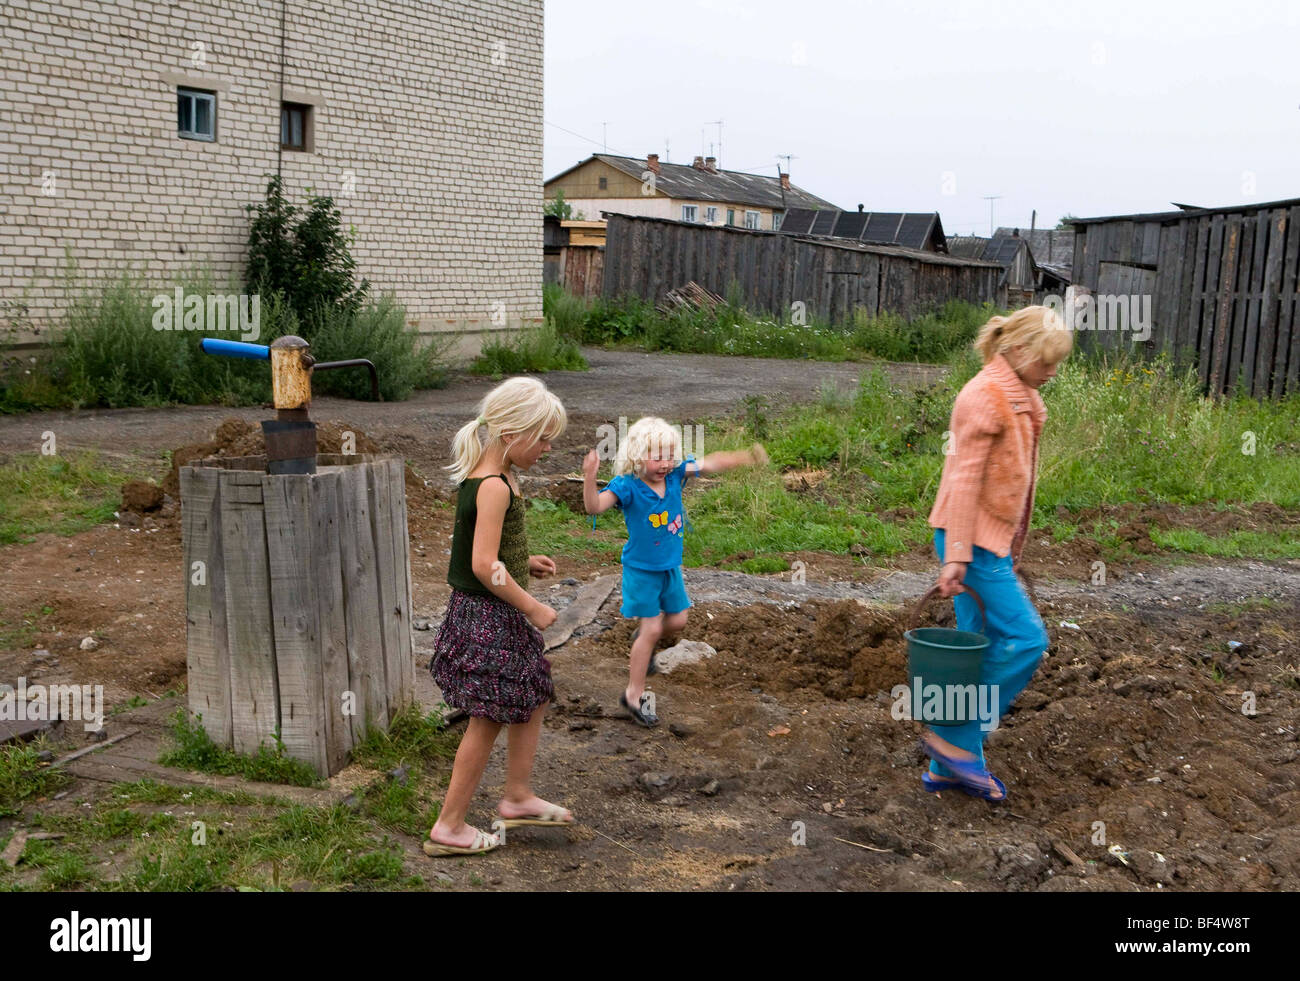 Family fetching bucket of water from water pump in rural Russia Stock Photo